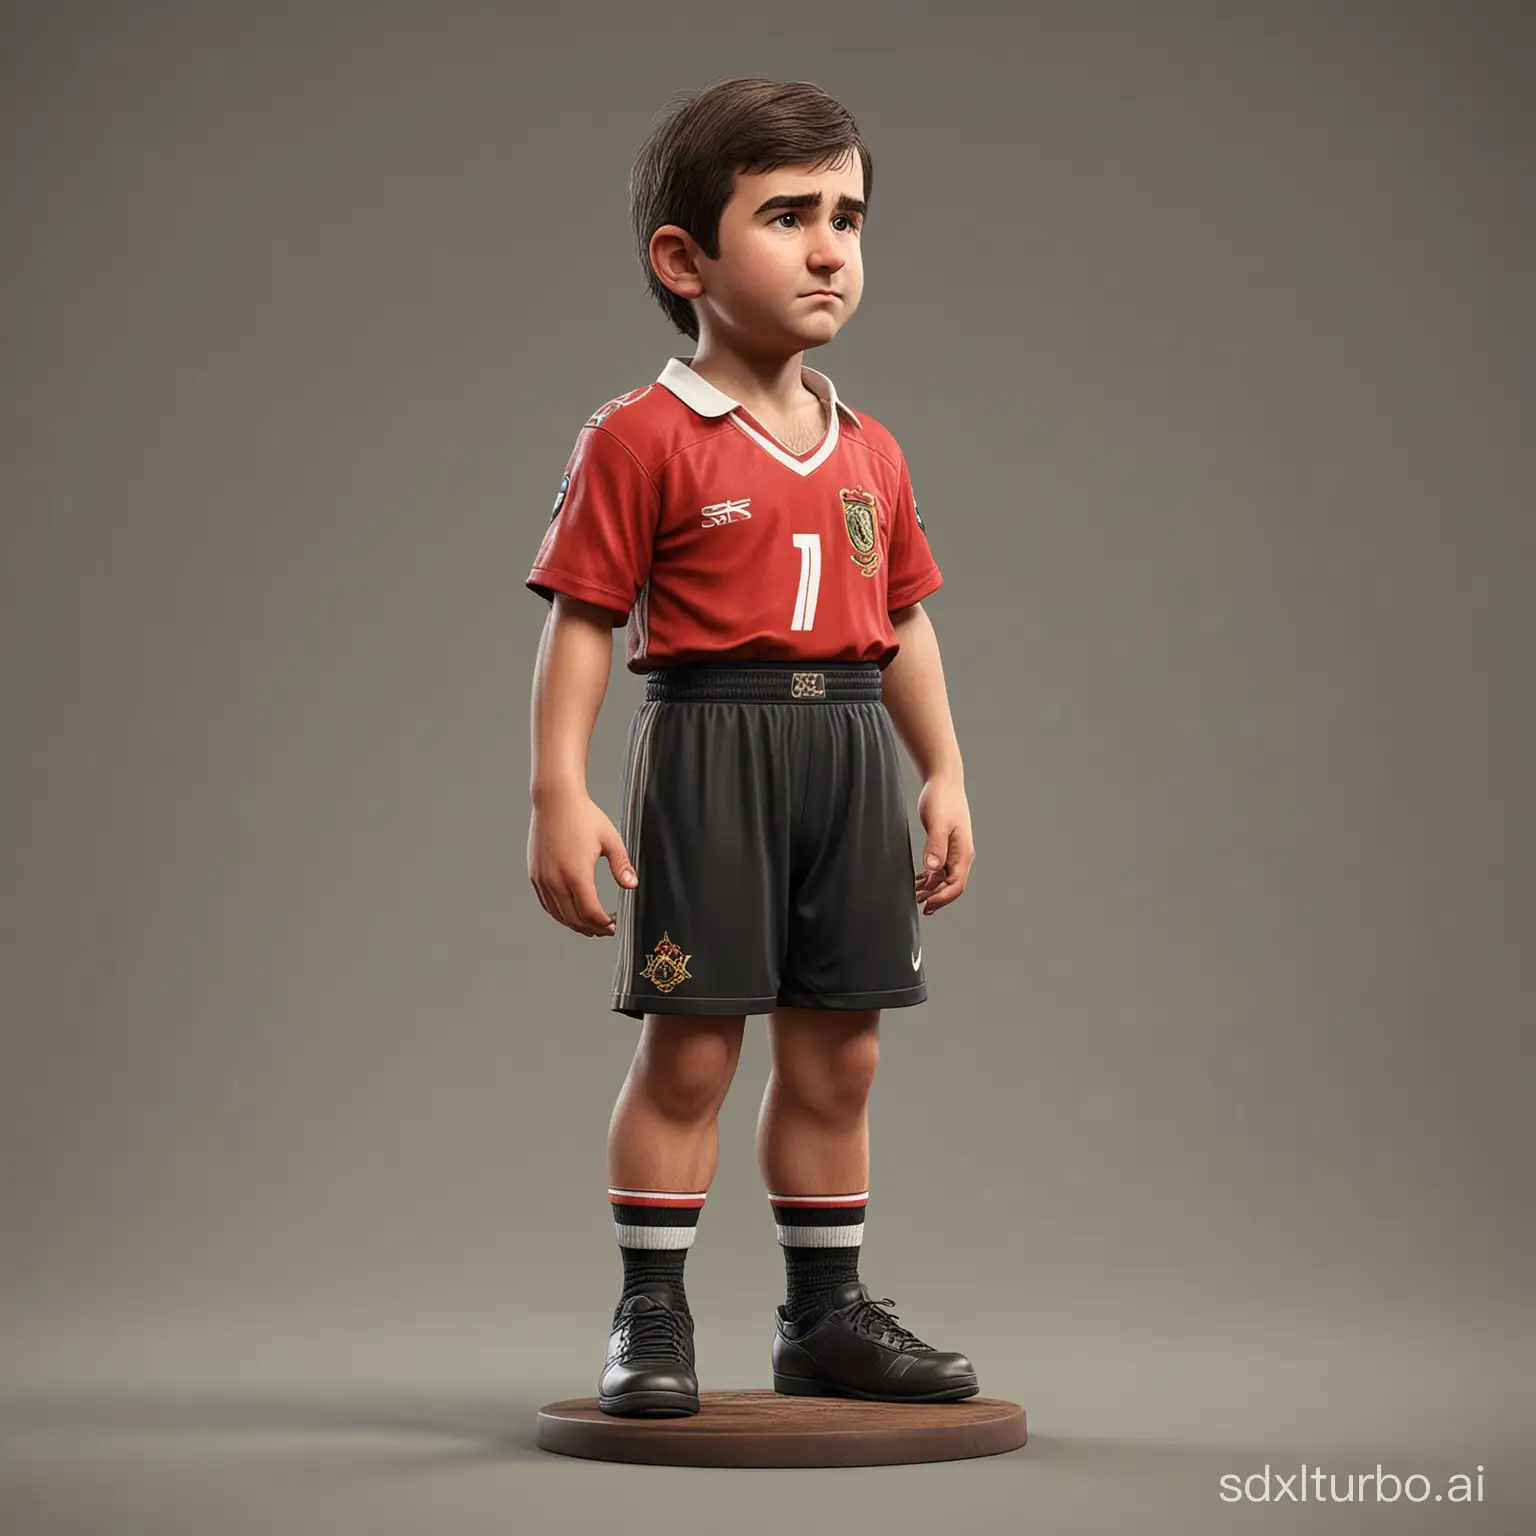 Little child cantona, game character, stands at full height